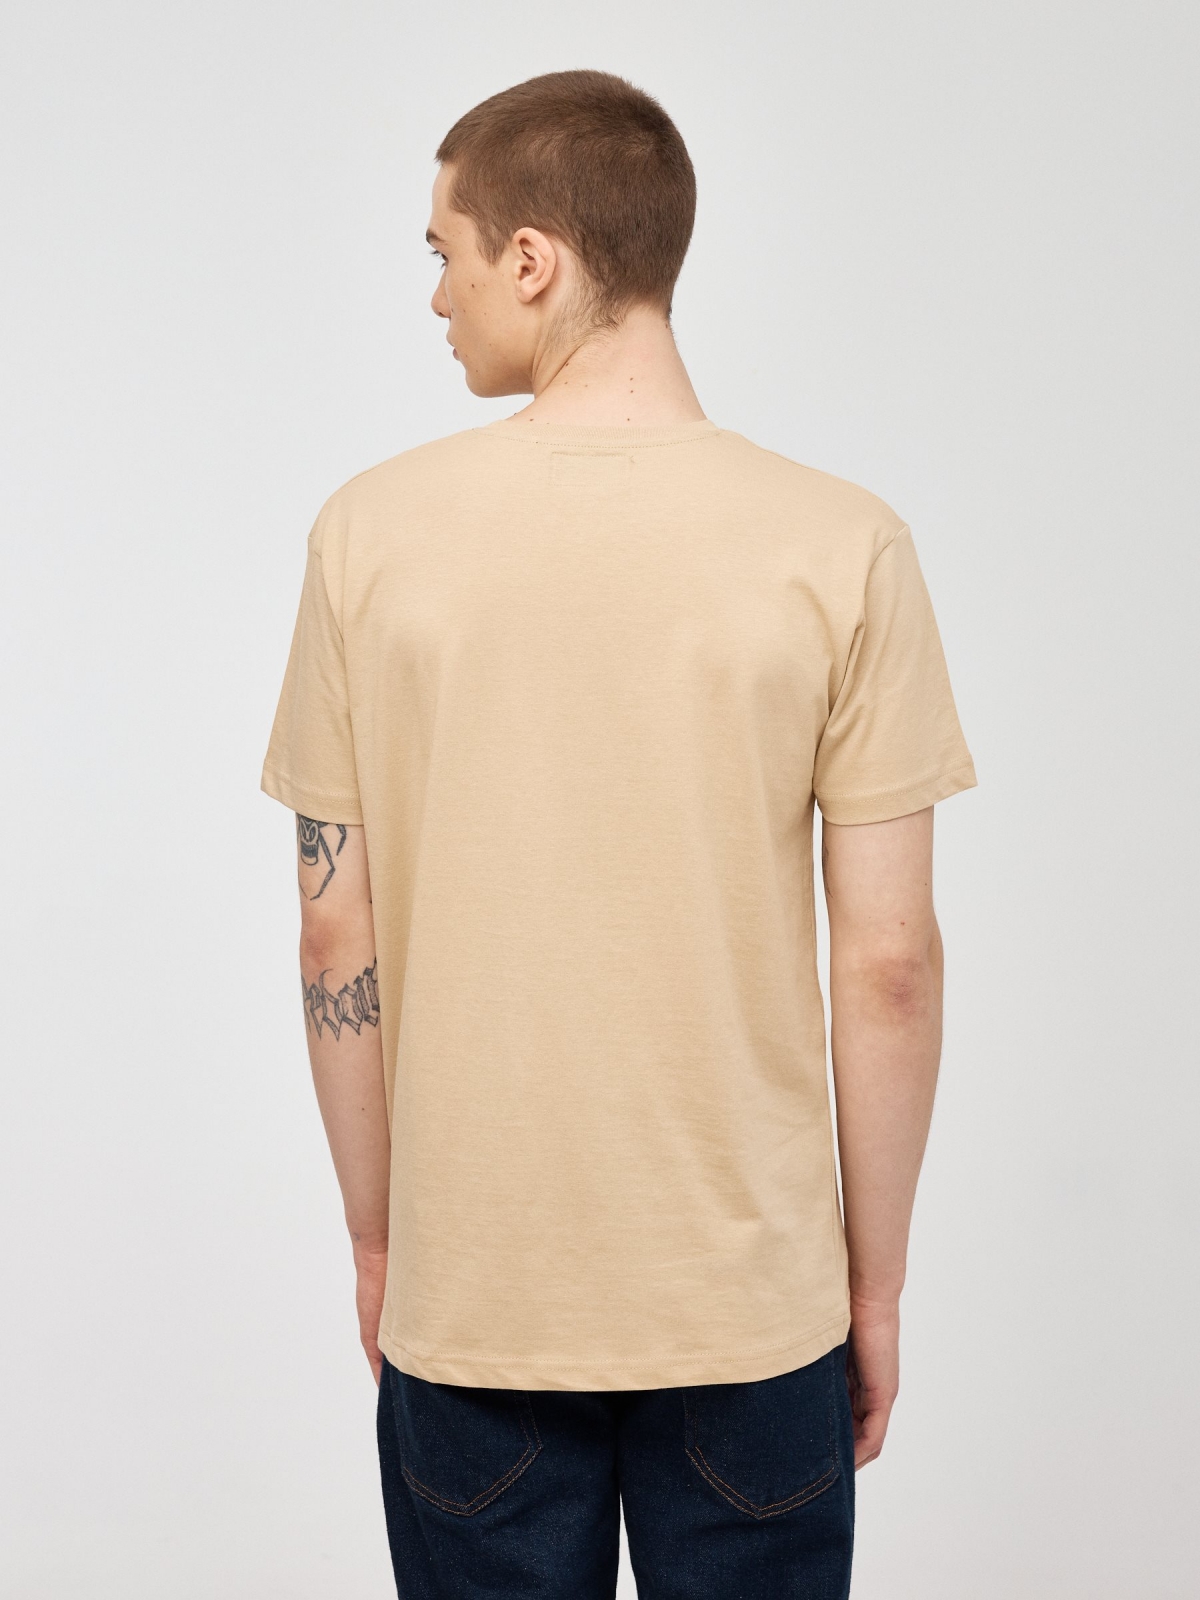 Text T-shirt with pocket sand middle back view